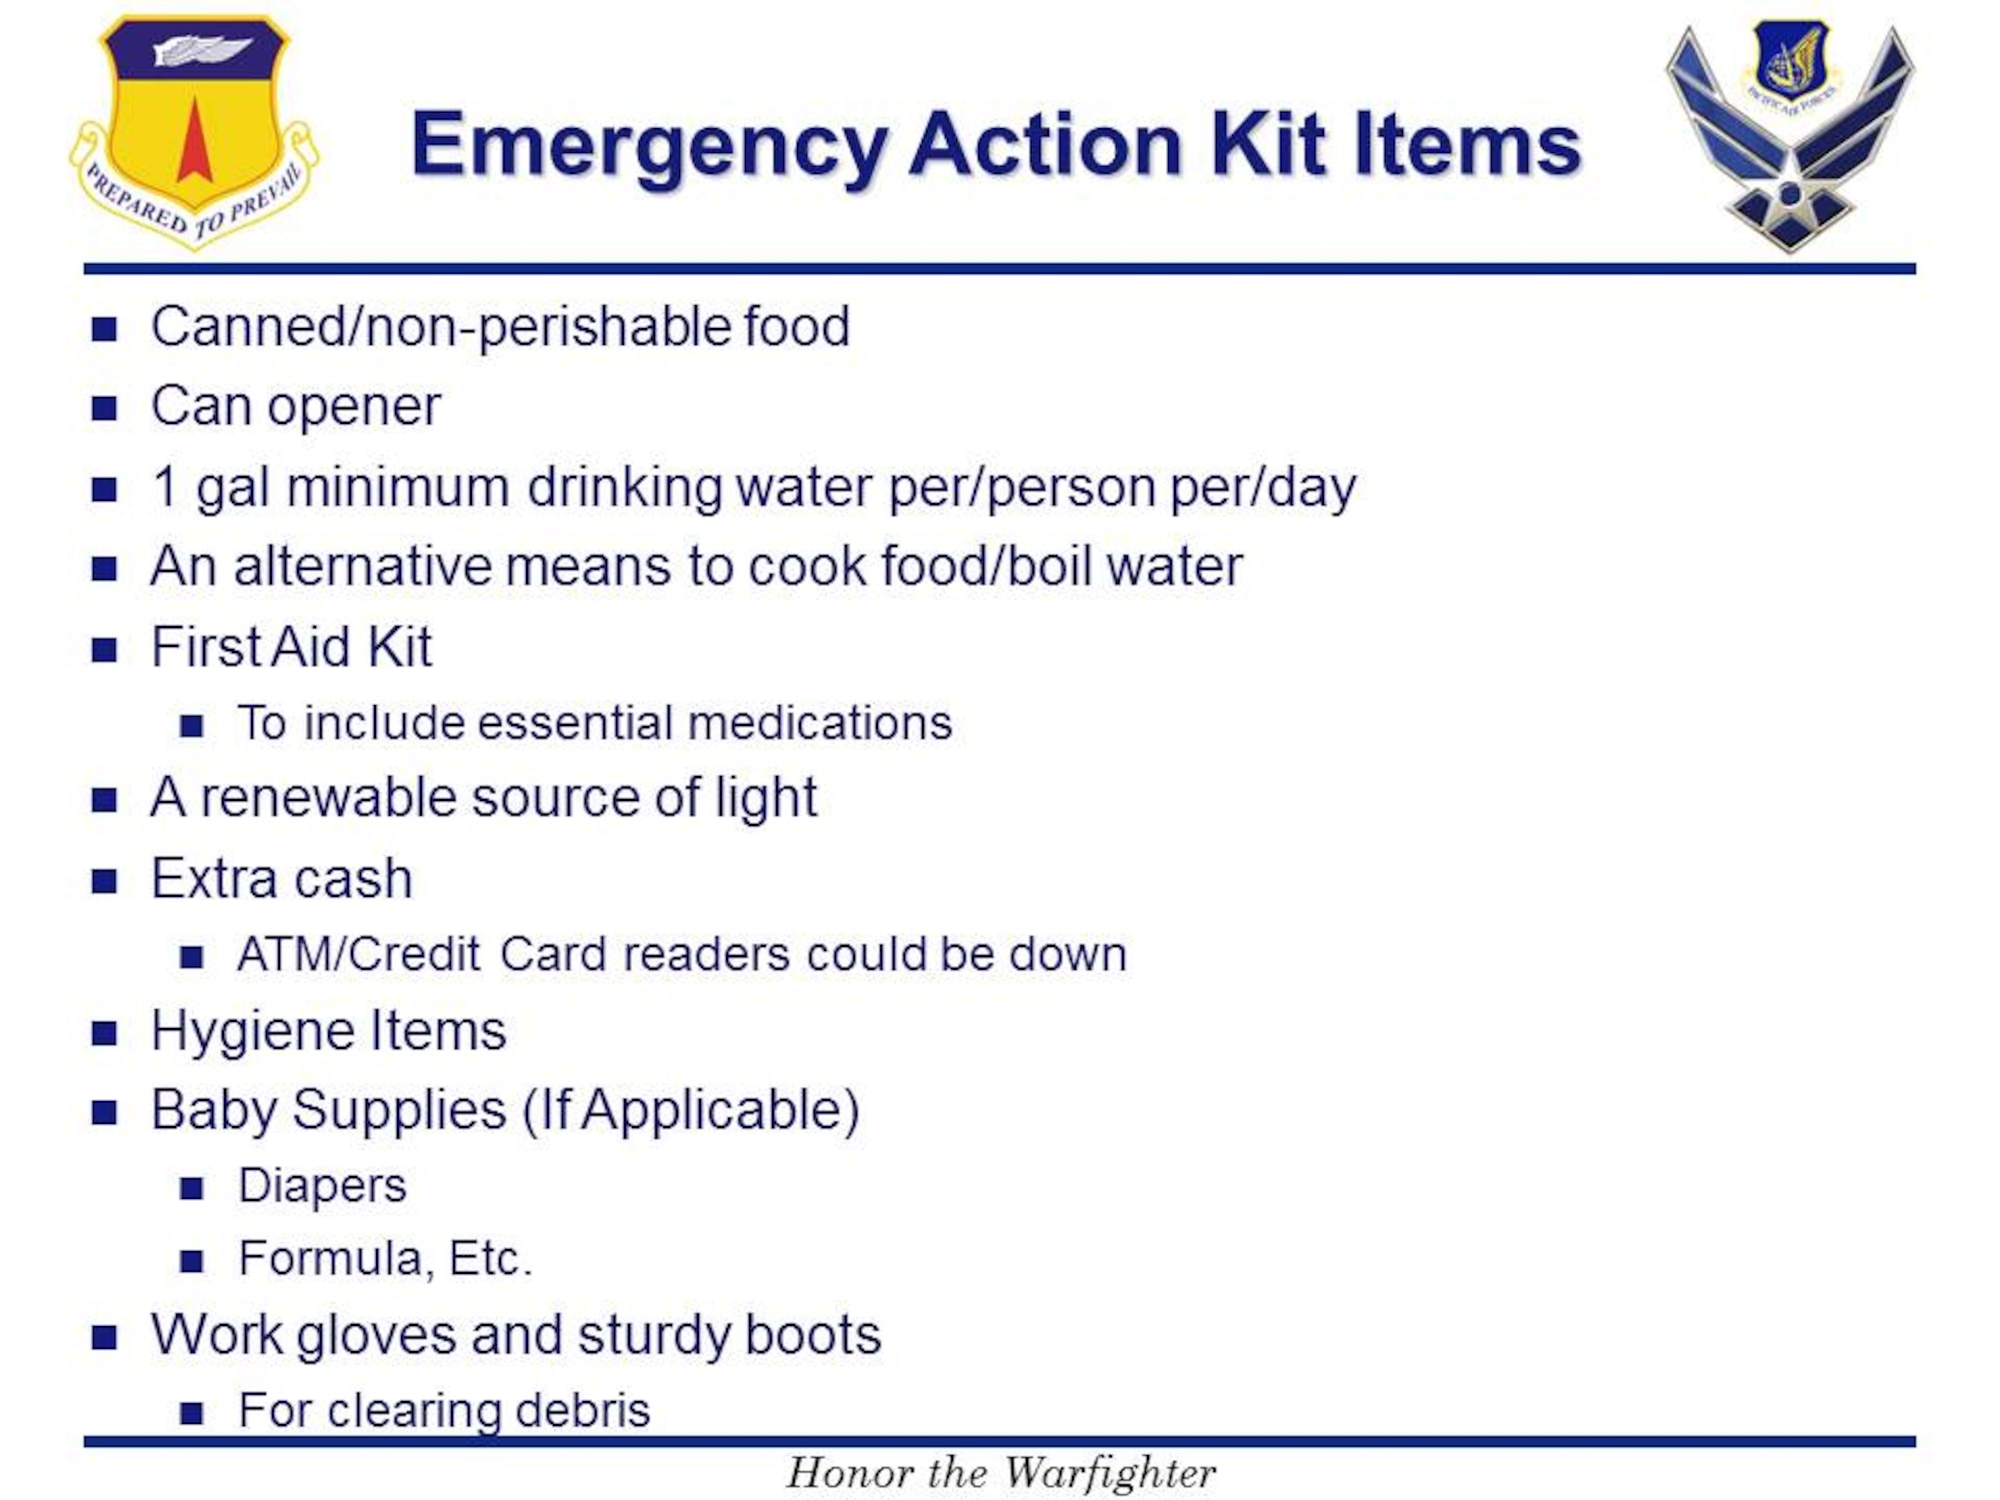 Now is the ideal time for individuals to build a 72-hour emergency action kit, to include resources like water, food and fuel, all of which may be difficult to come by in the moments immediately following disaster. The kit should contain enough supplies to last each person for at least 72 hours.
